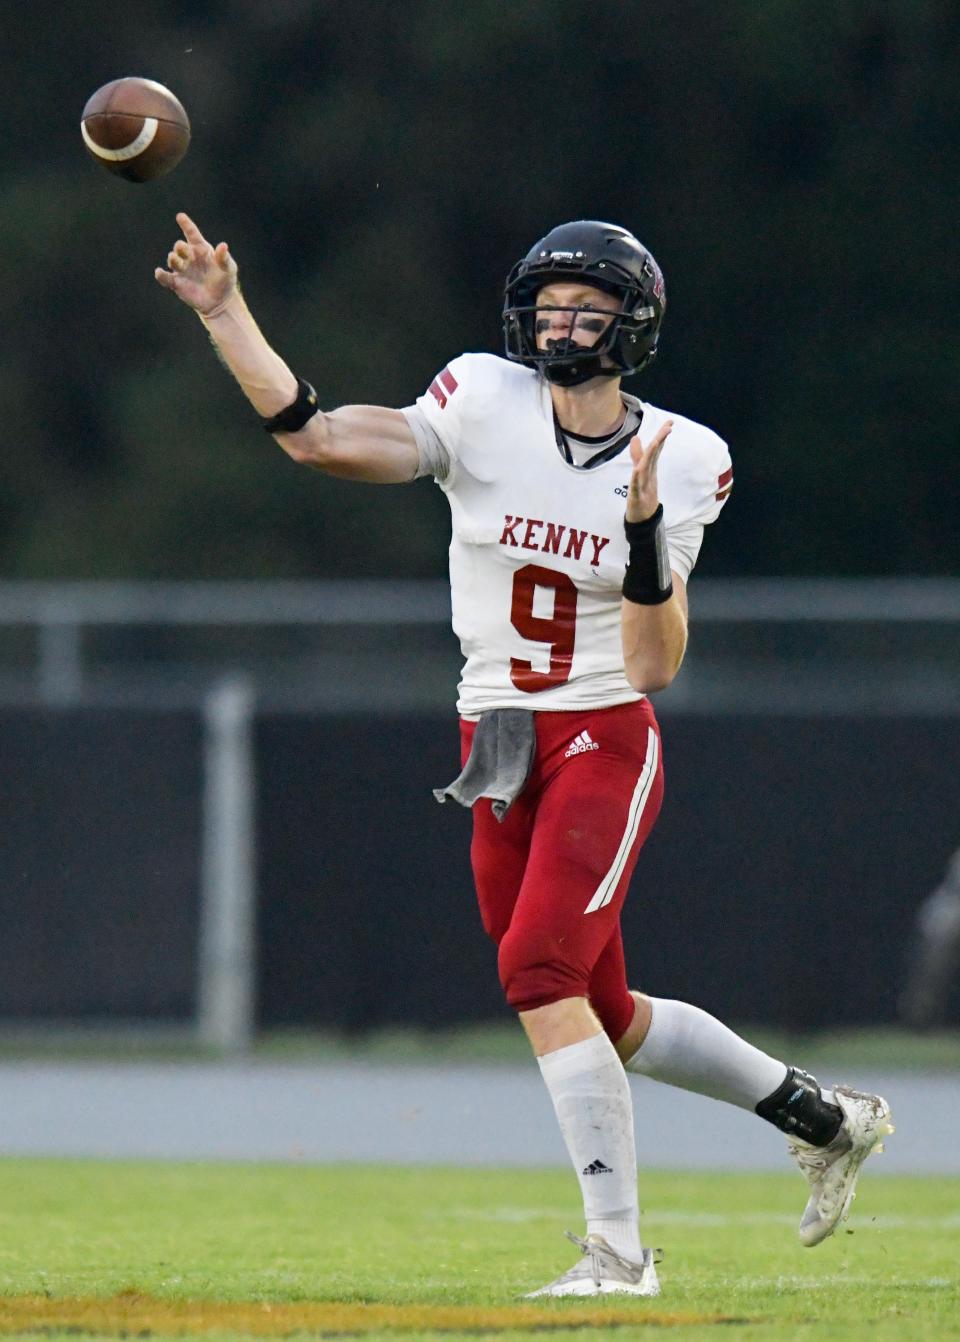 Bishop Kenny quarterback James Resar throws a pass during a September 2022 game against Tocoi Creek.